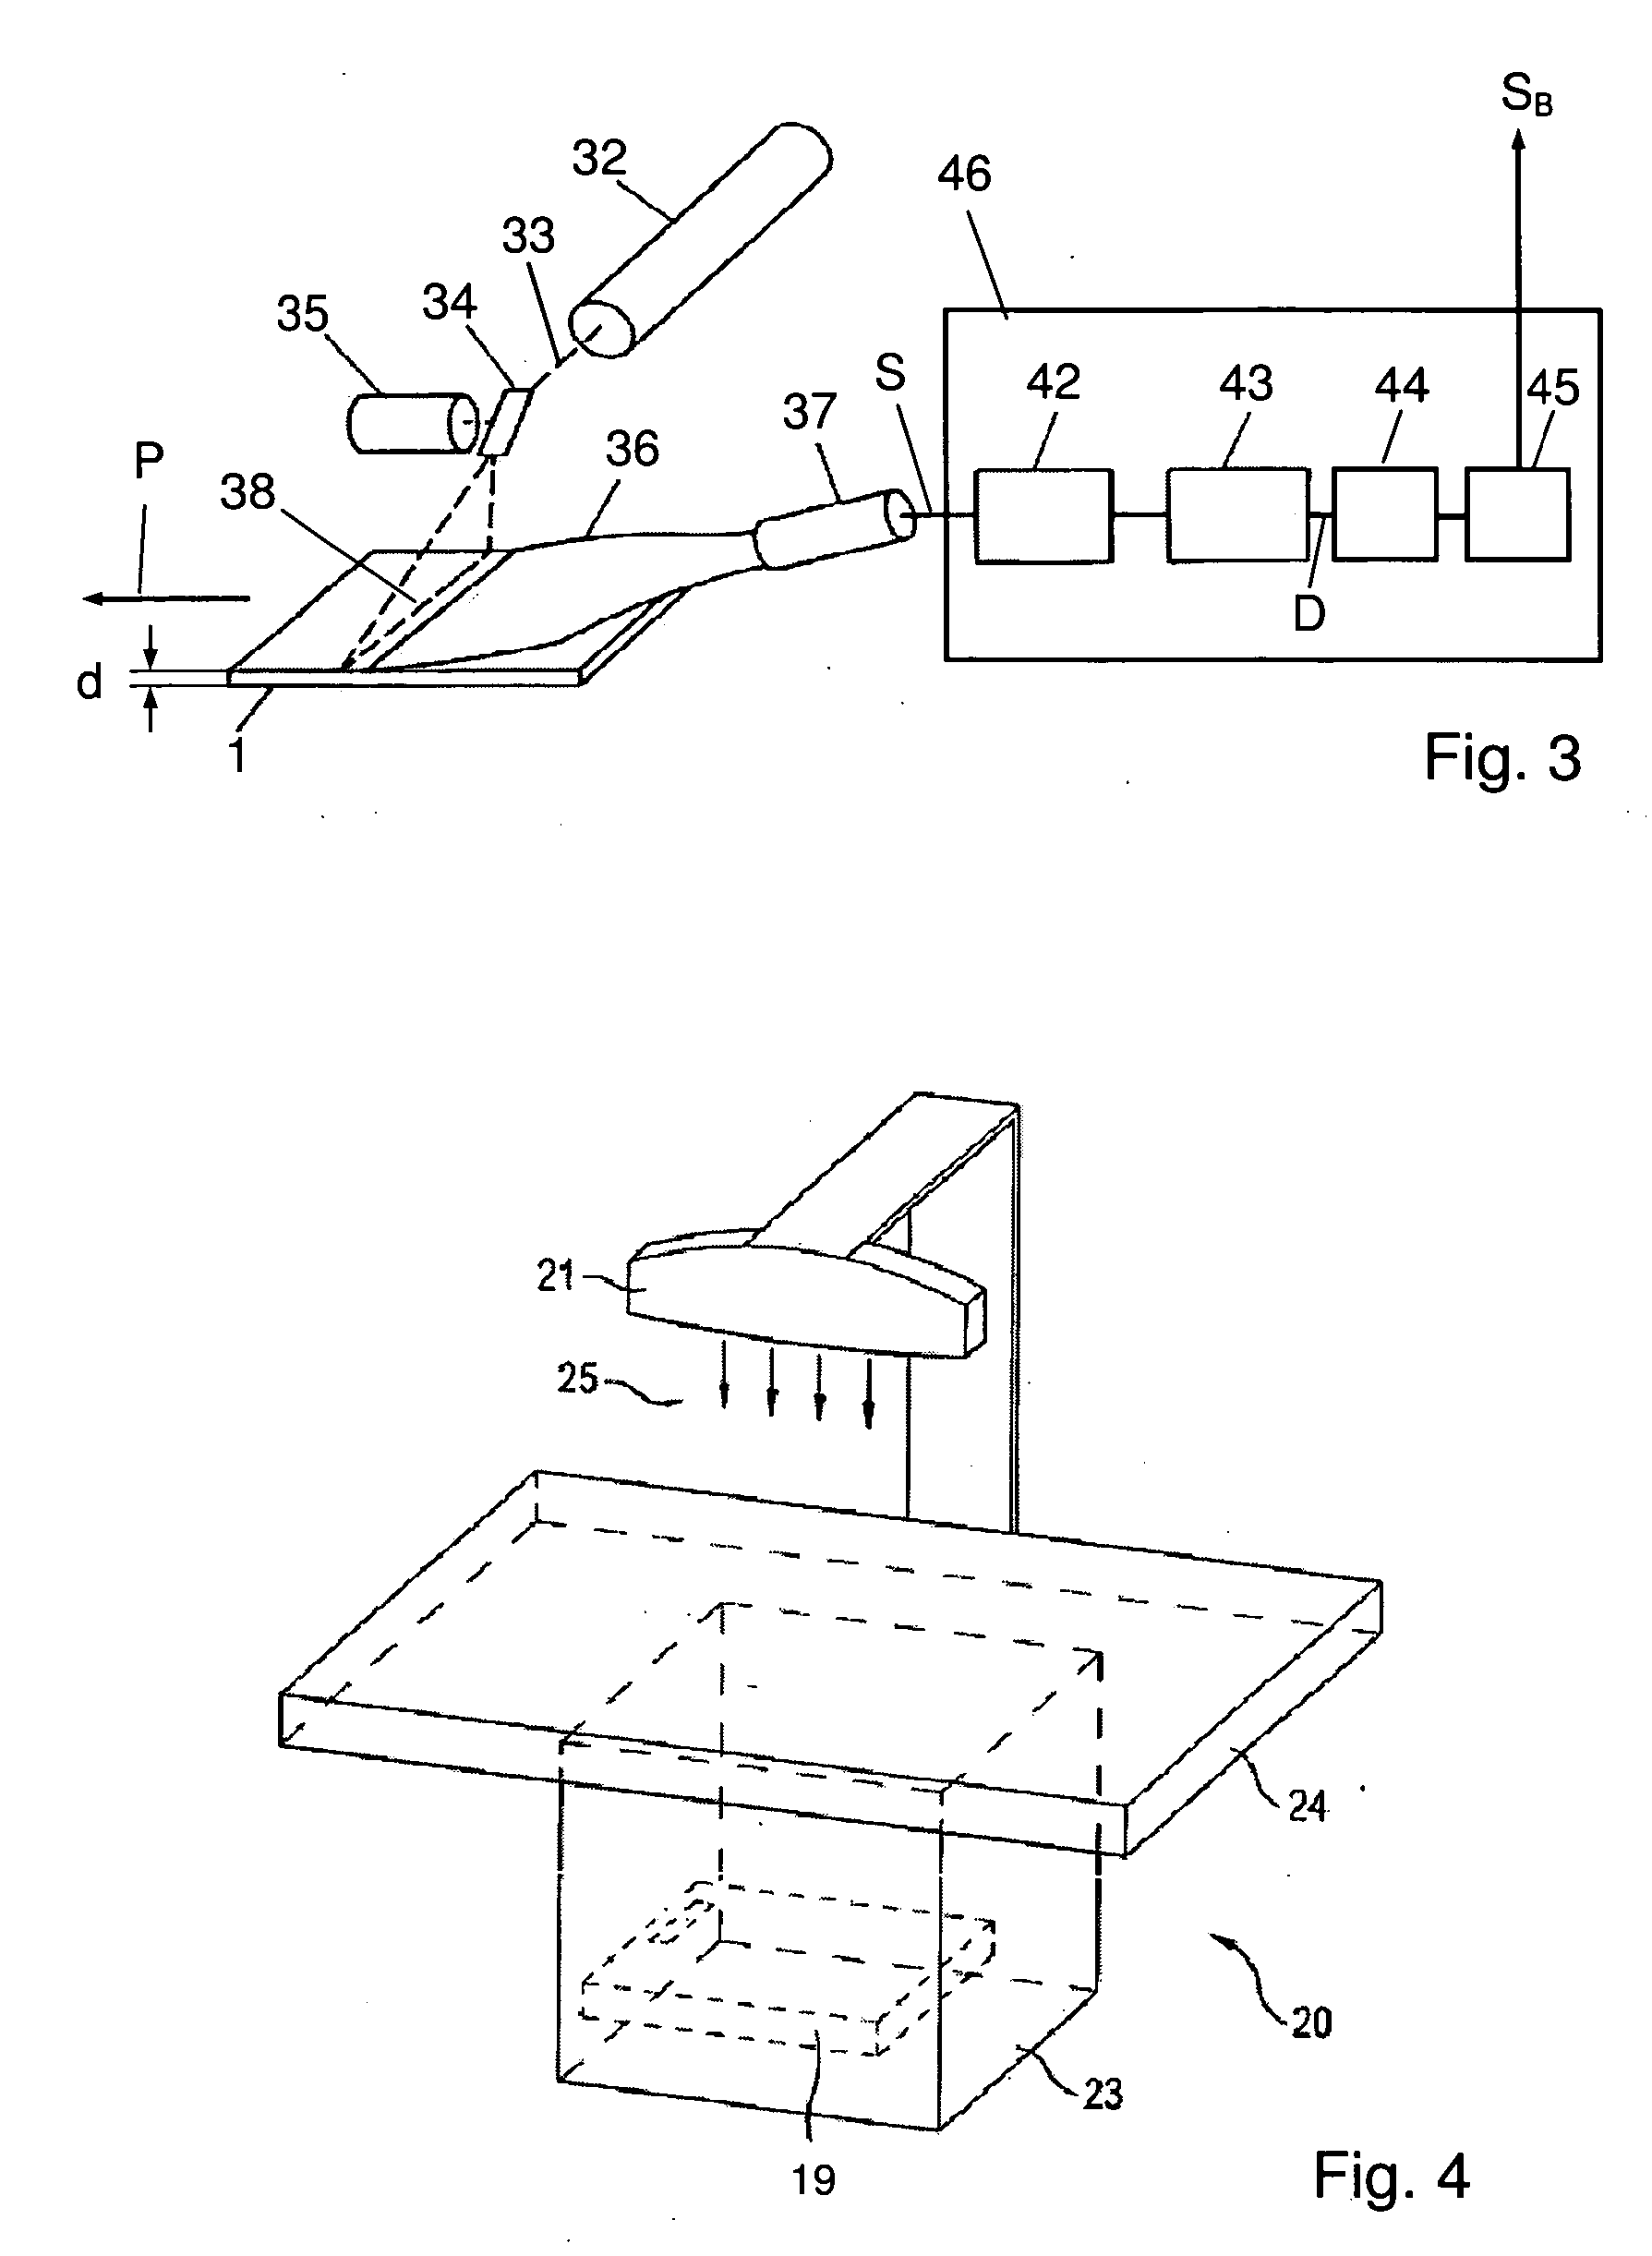 Radiography system and method for recording X-rays in phosphor layers